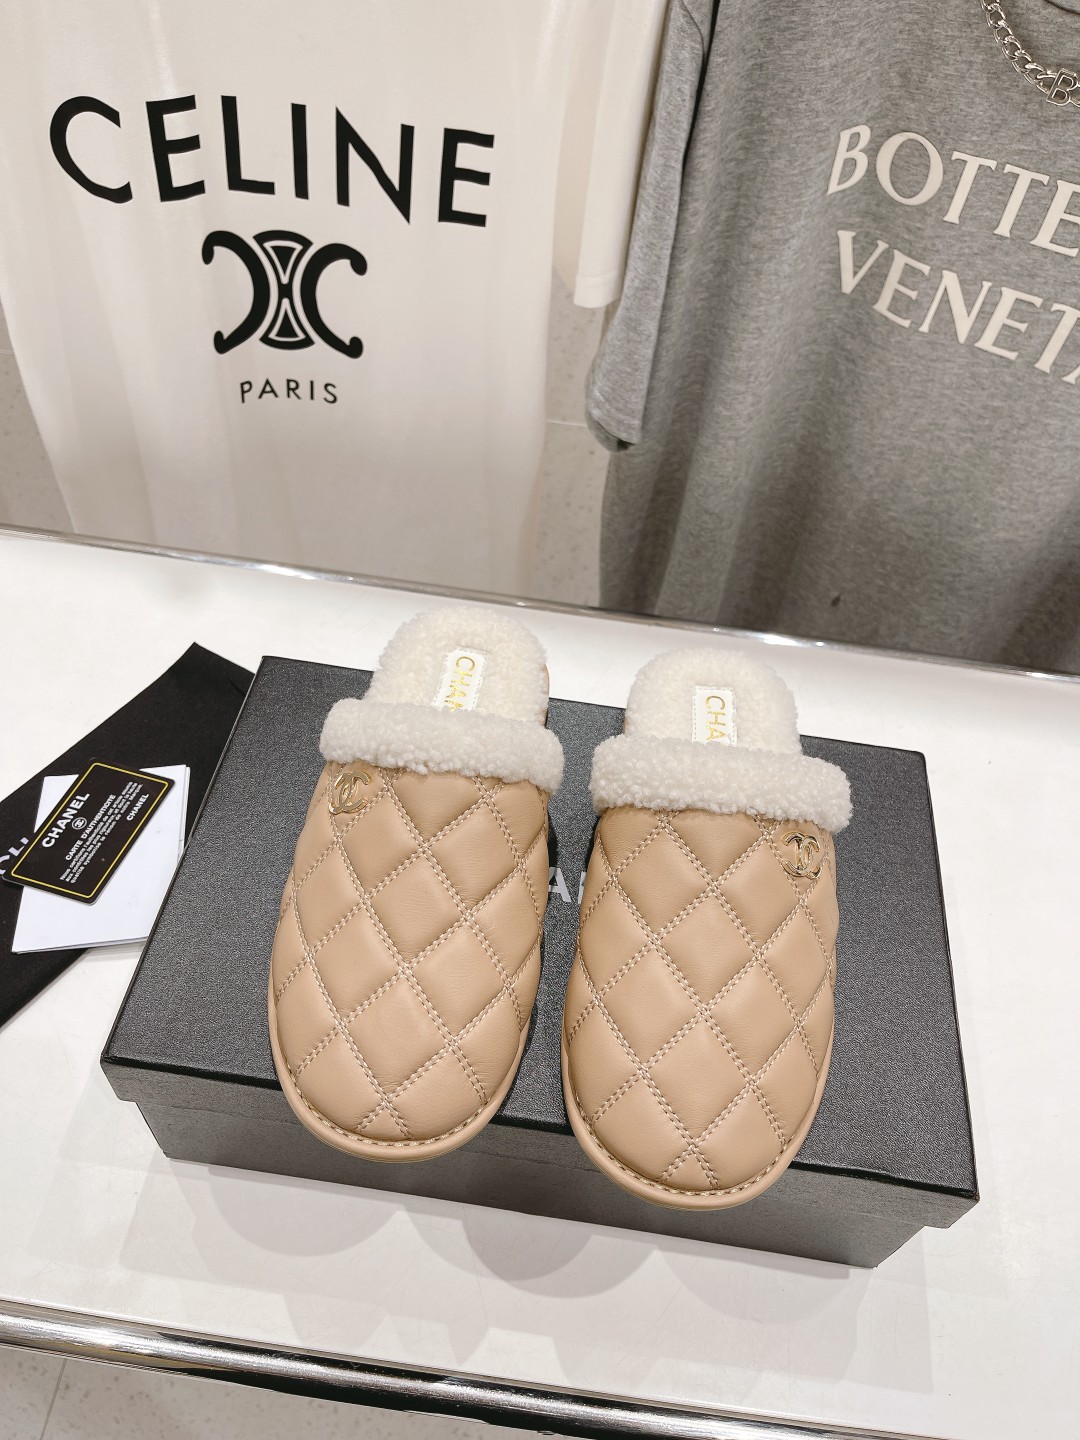 Chanel Shoes Half Slippers Lambswool Sheepskin Wool Winter Collection